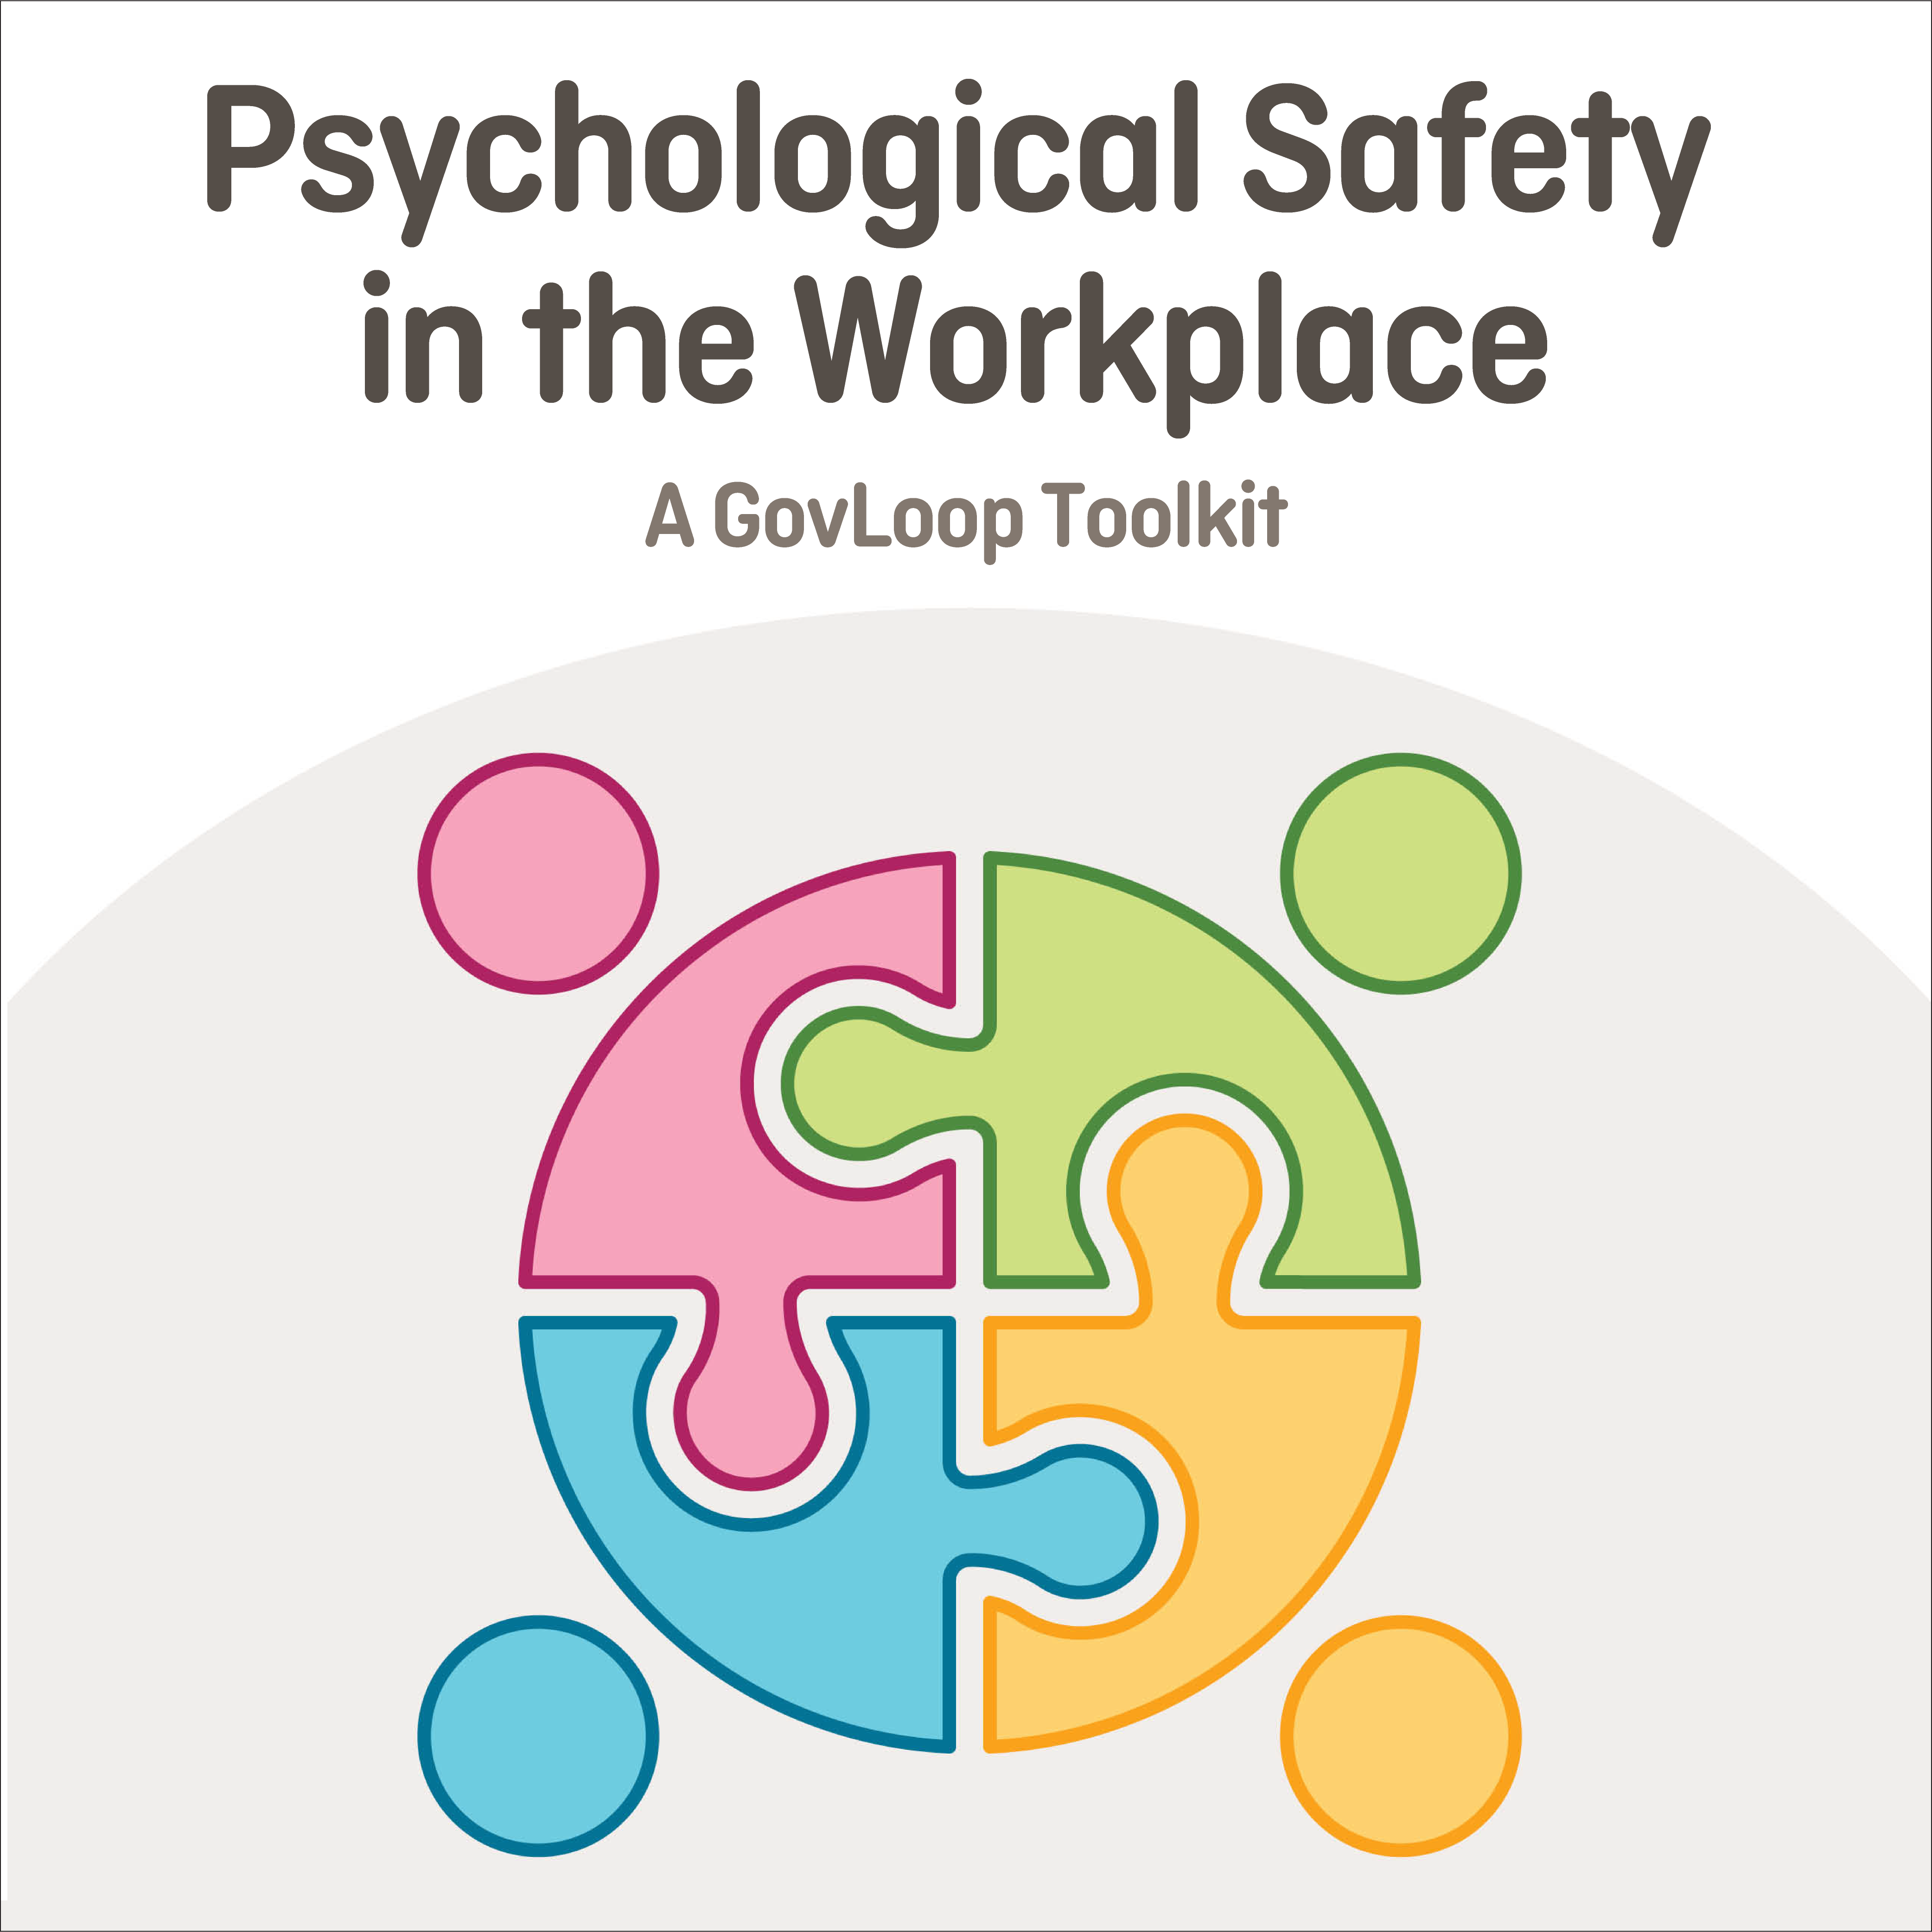 Psychological-Safety-in-the-Workplace-A-GovLoop-Toolkit_square image.png